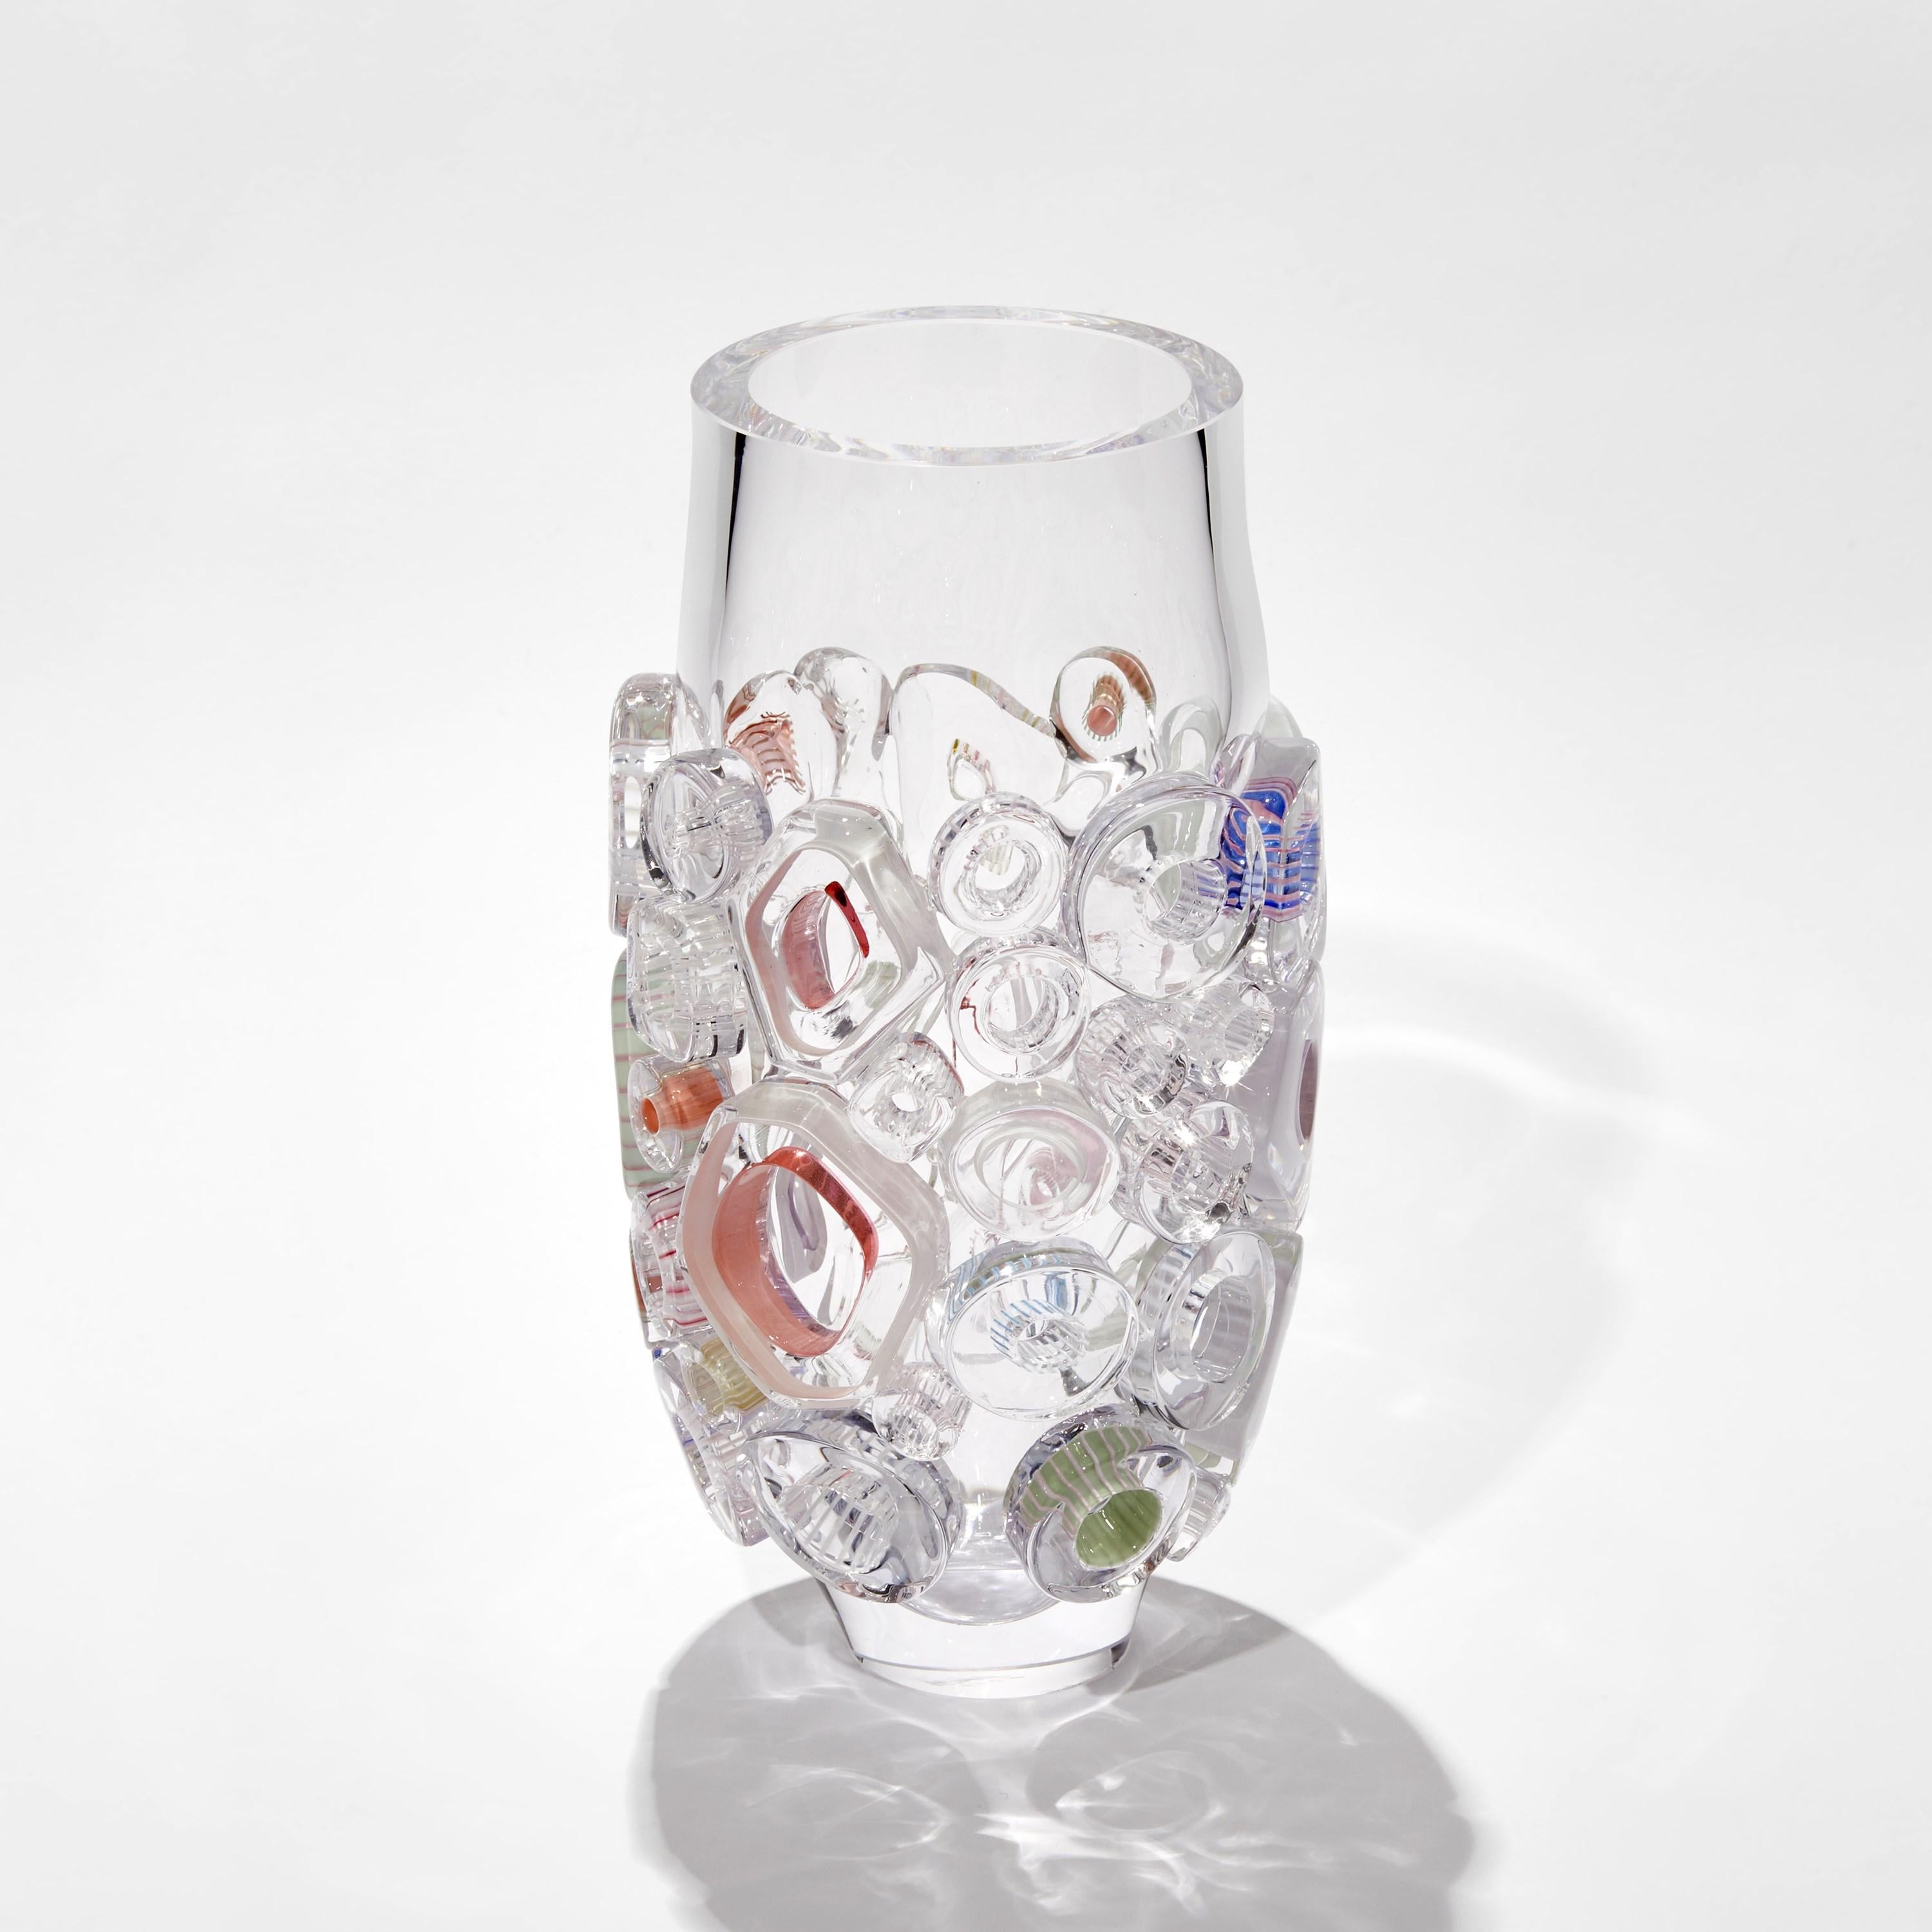 ‘Bright Field Clear’ is a unique sculptural glass vase by the German artist, Sabine Lintzen.

The initial inner form is free-blown and adorned with various individually shaped murrini. The top edge had been cut and polished to create a beautiful